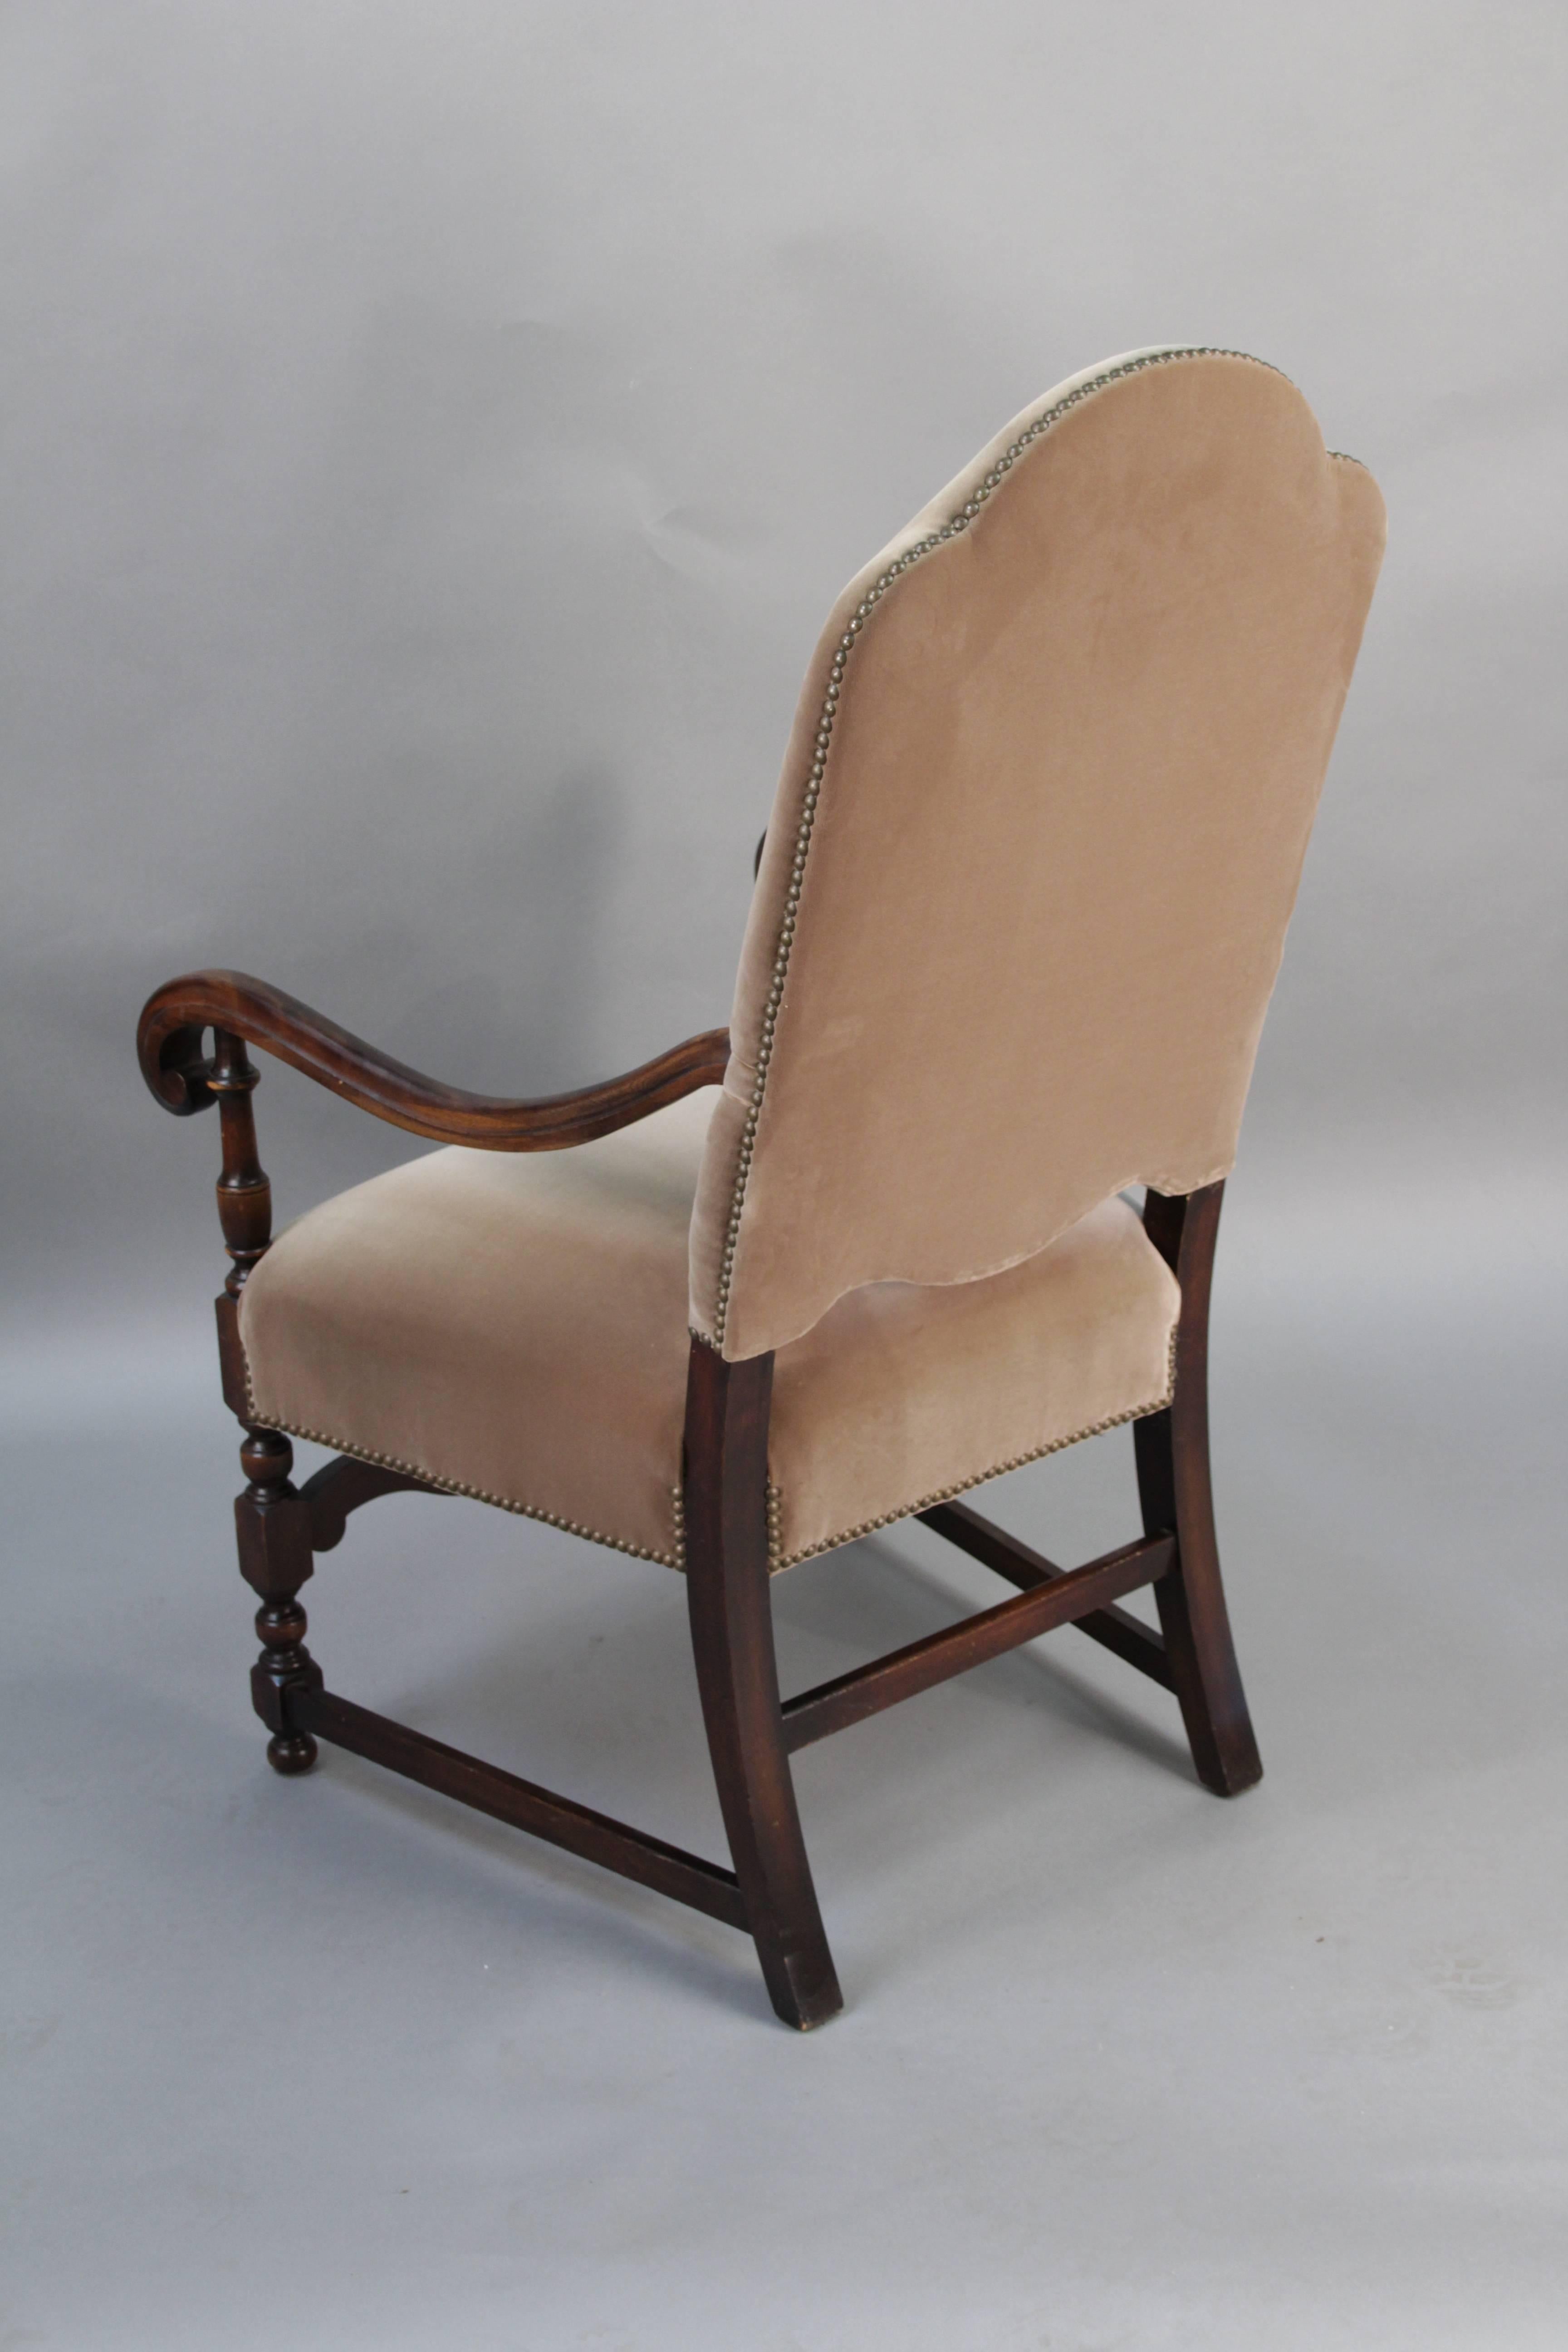 North American Antique 1920s Spanish Revival Armchair